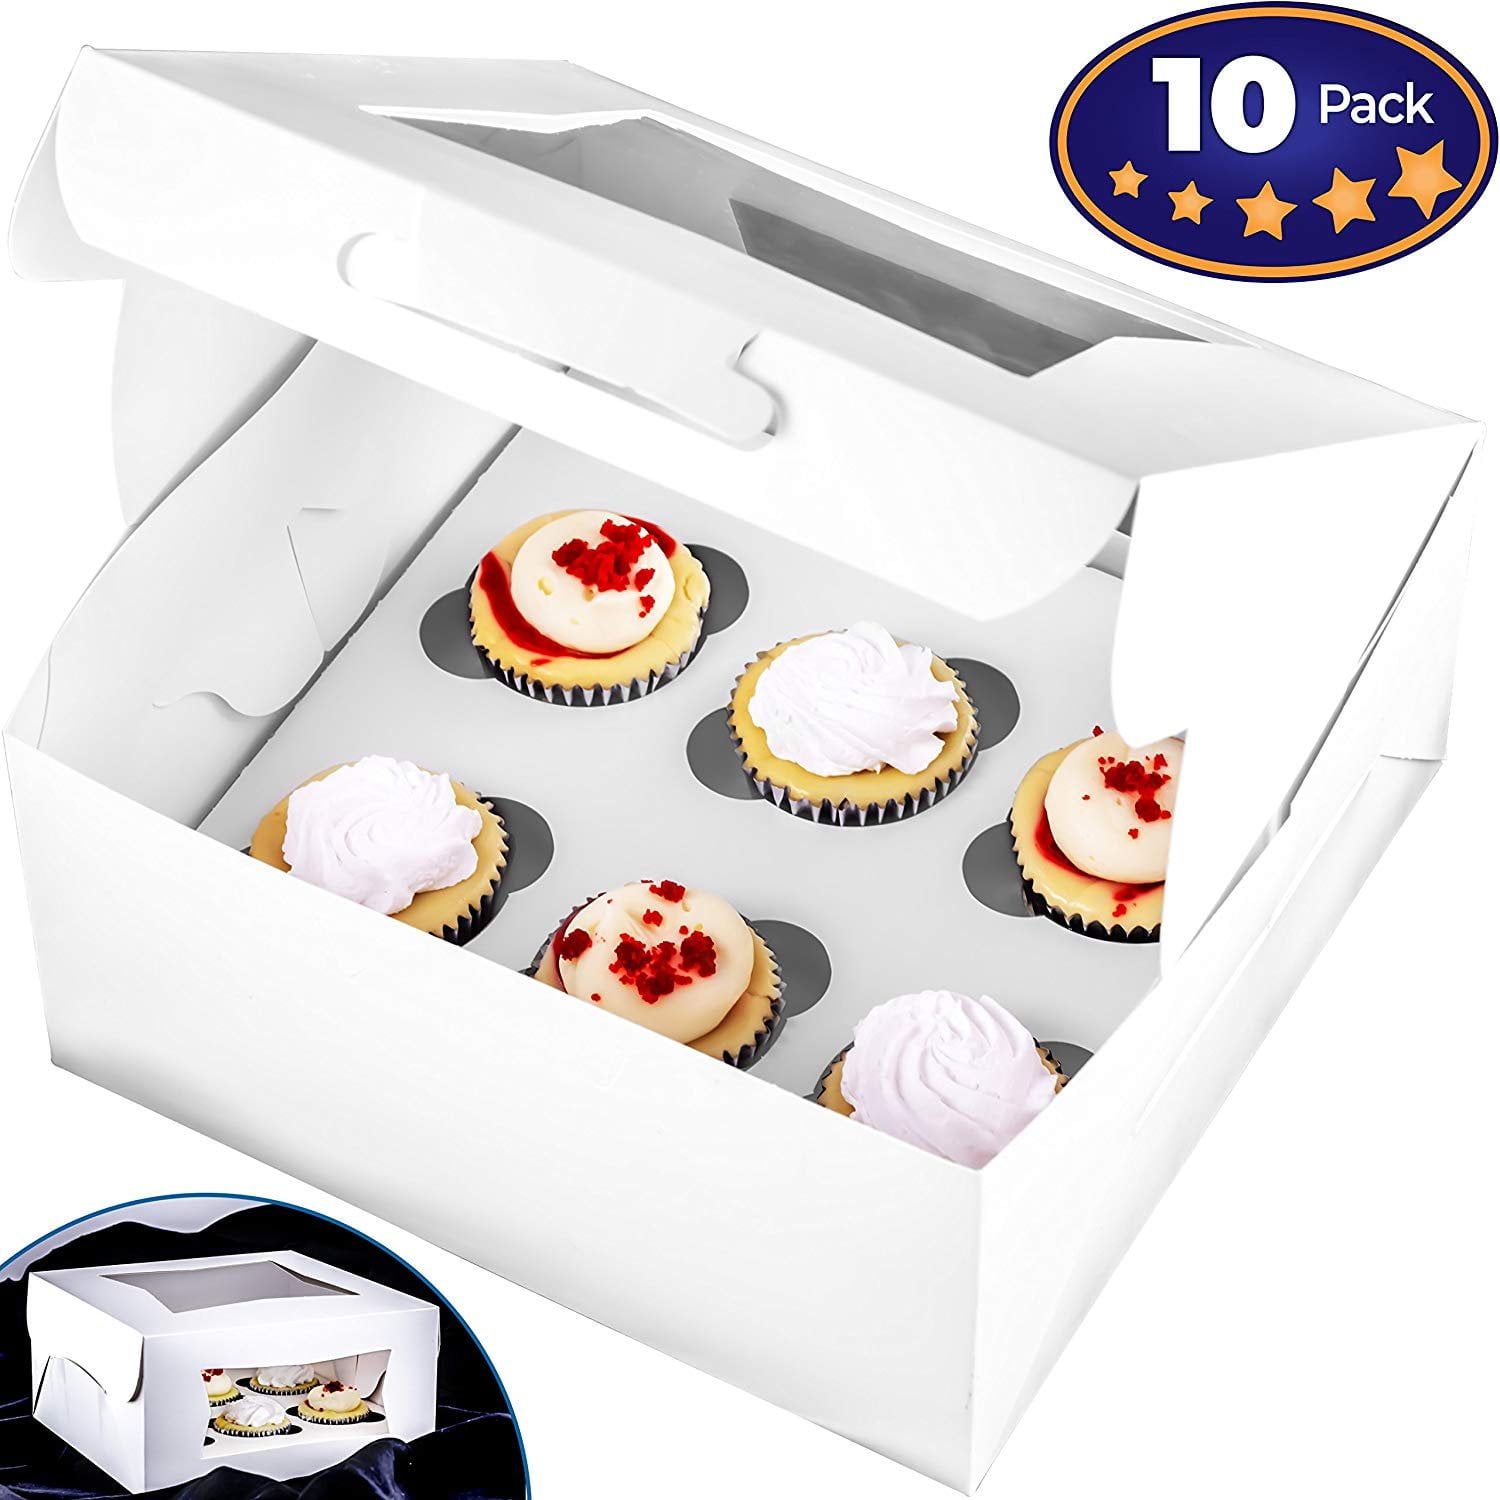 Pro-Quality Bakery Boxes for 6 Cupcakes with Display Window & Cupcake